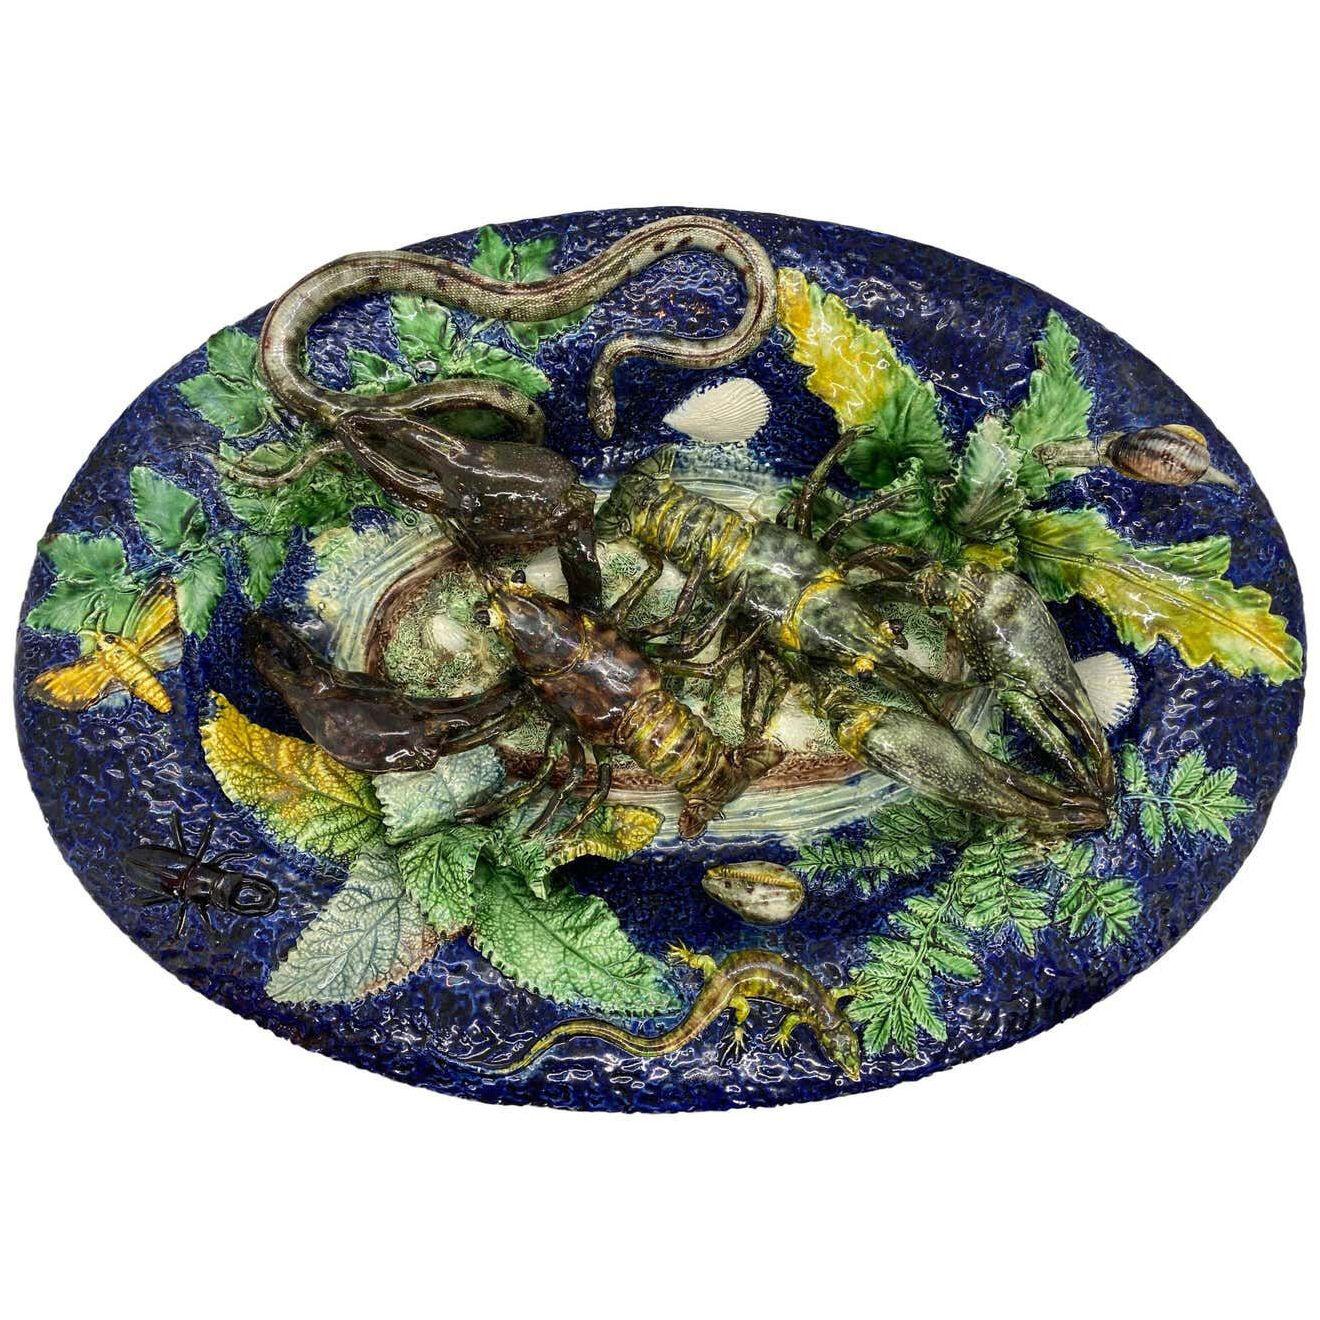 Majolica Palissy Ware Plaque, Victor Benizet, Lobsters Cobalt Blue French